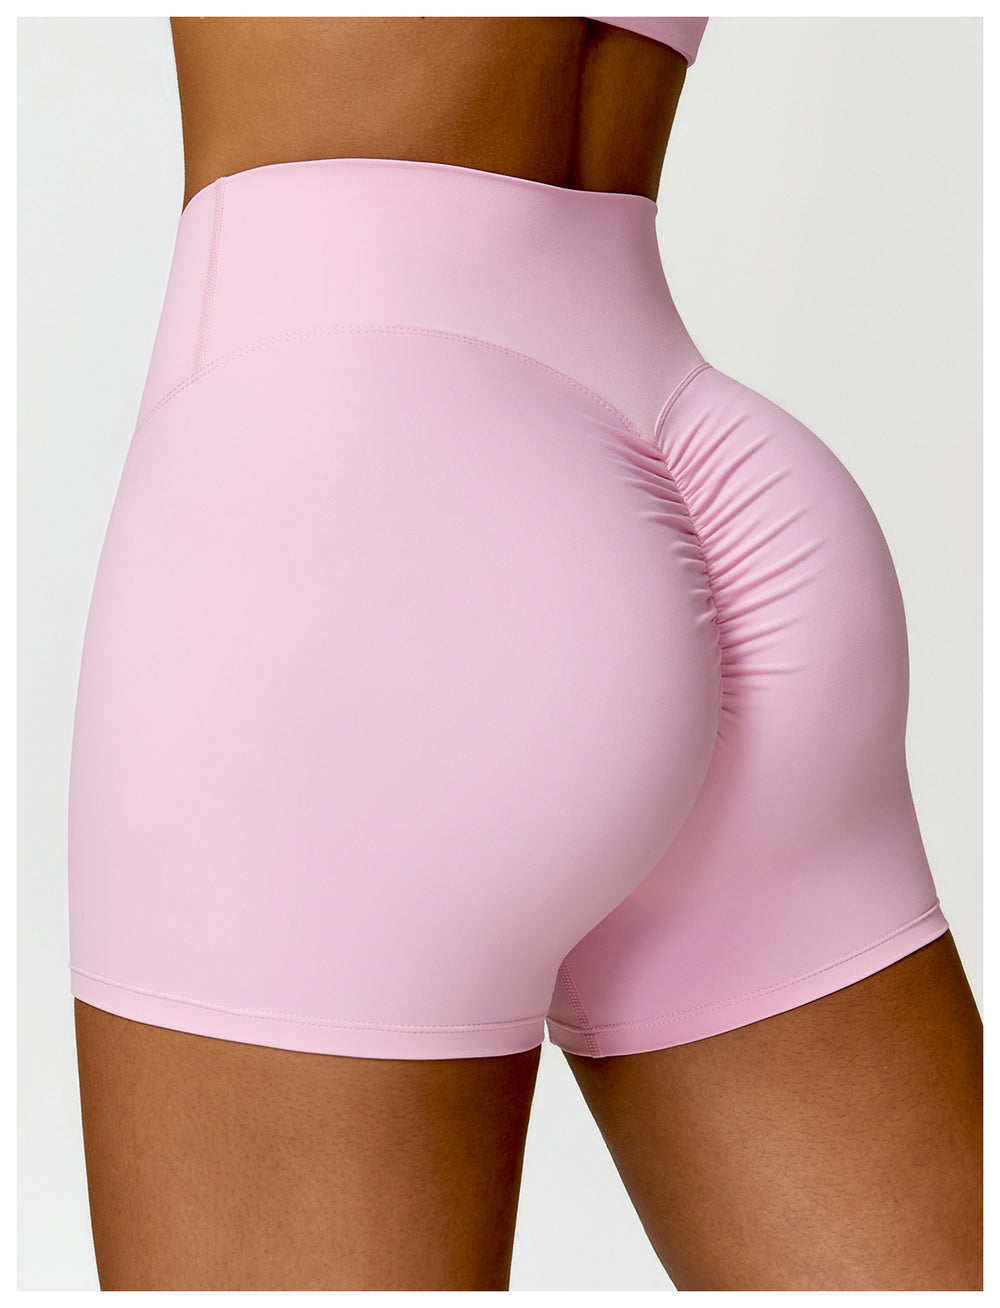 Brushed High Waist Yoga Shorts Belly Contracting Peach Hip Raise Running Fitness Pants Slim Fit Sports Shorts